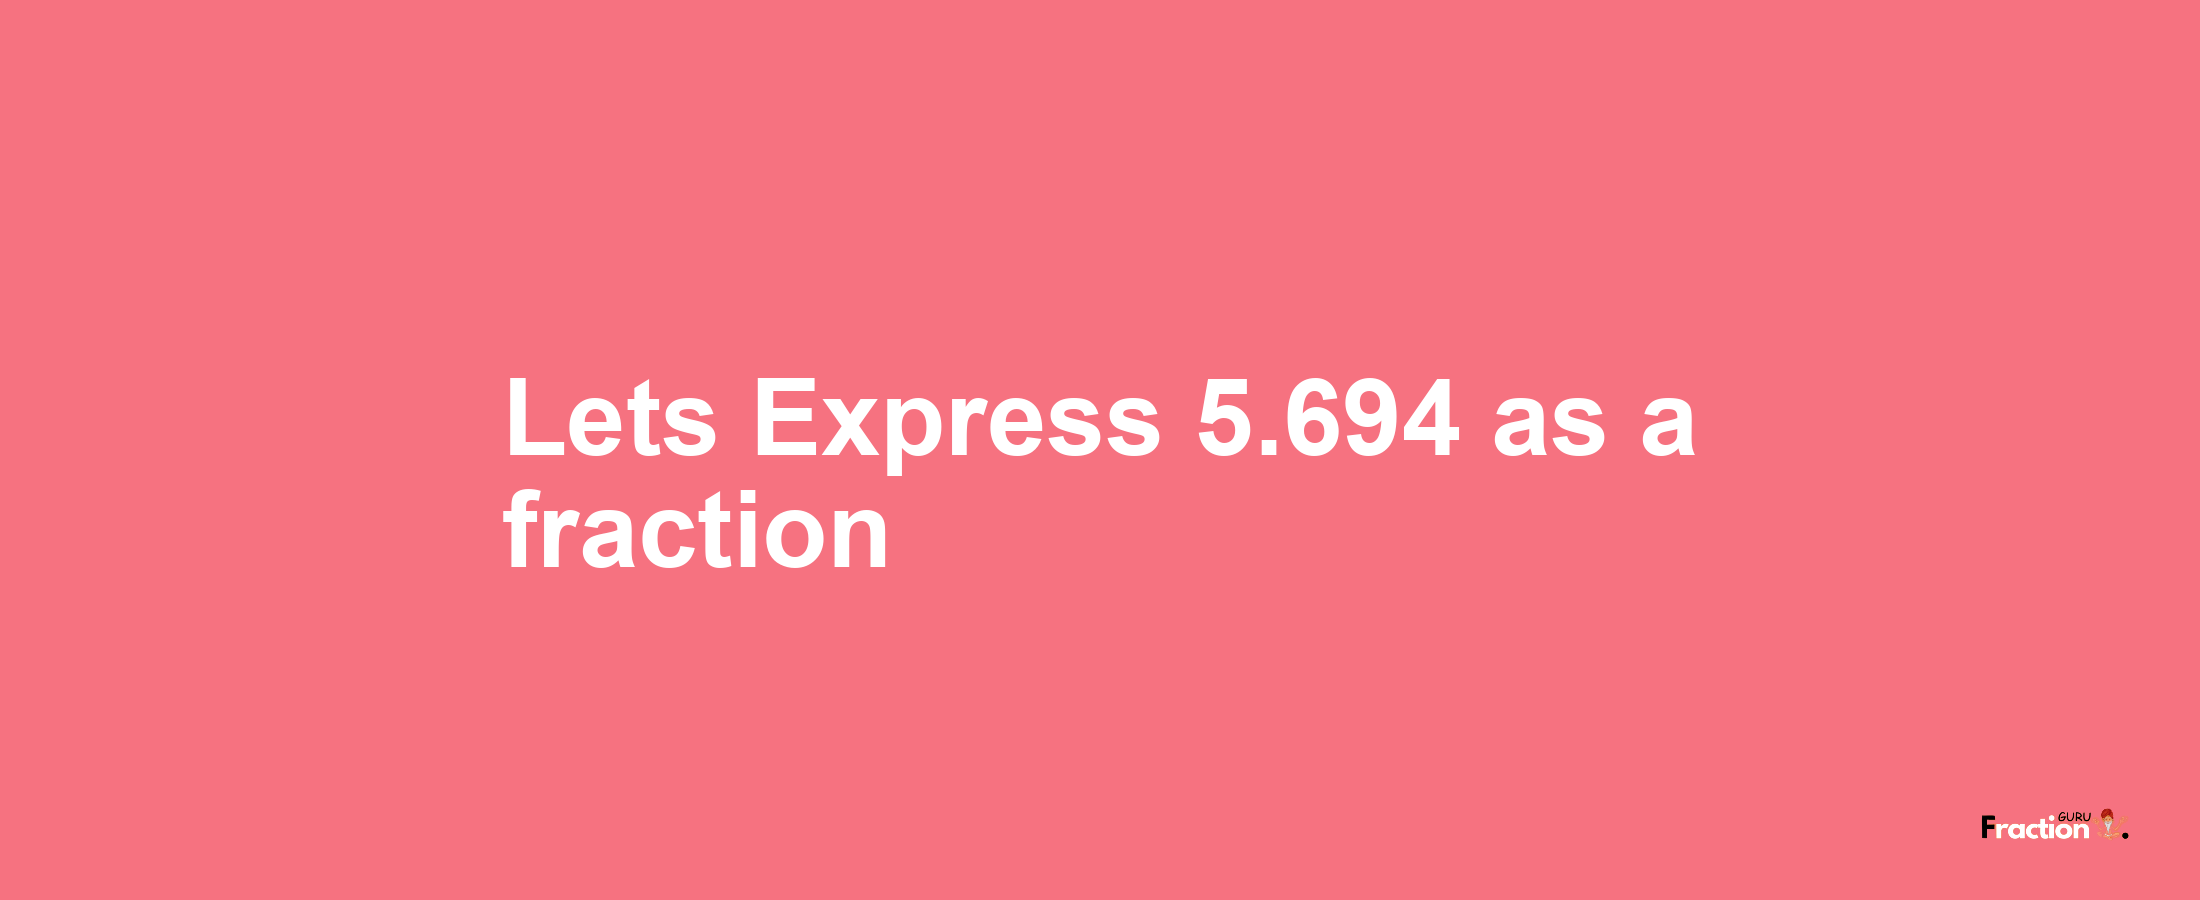 Lets Express 5.694 as afraction